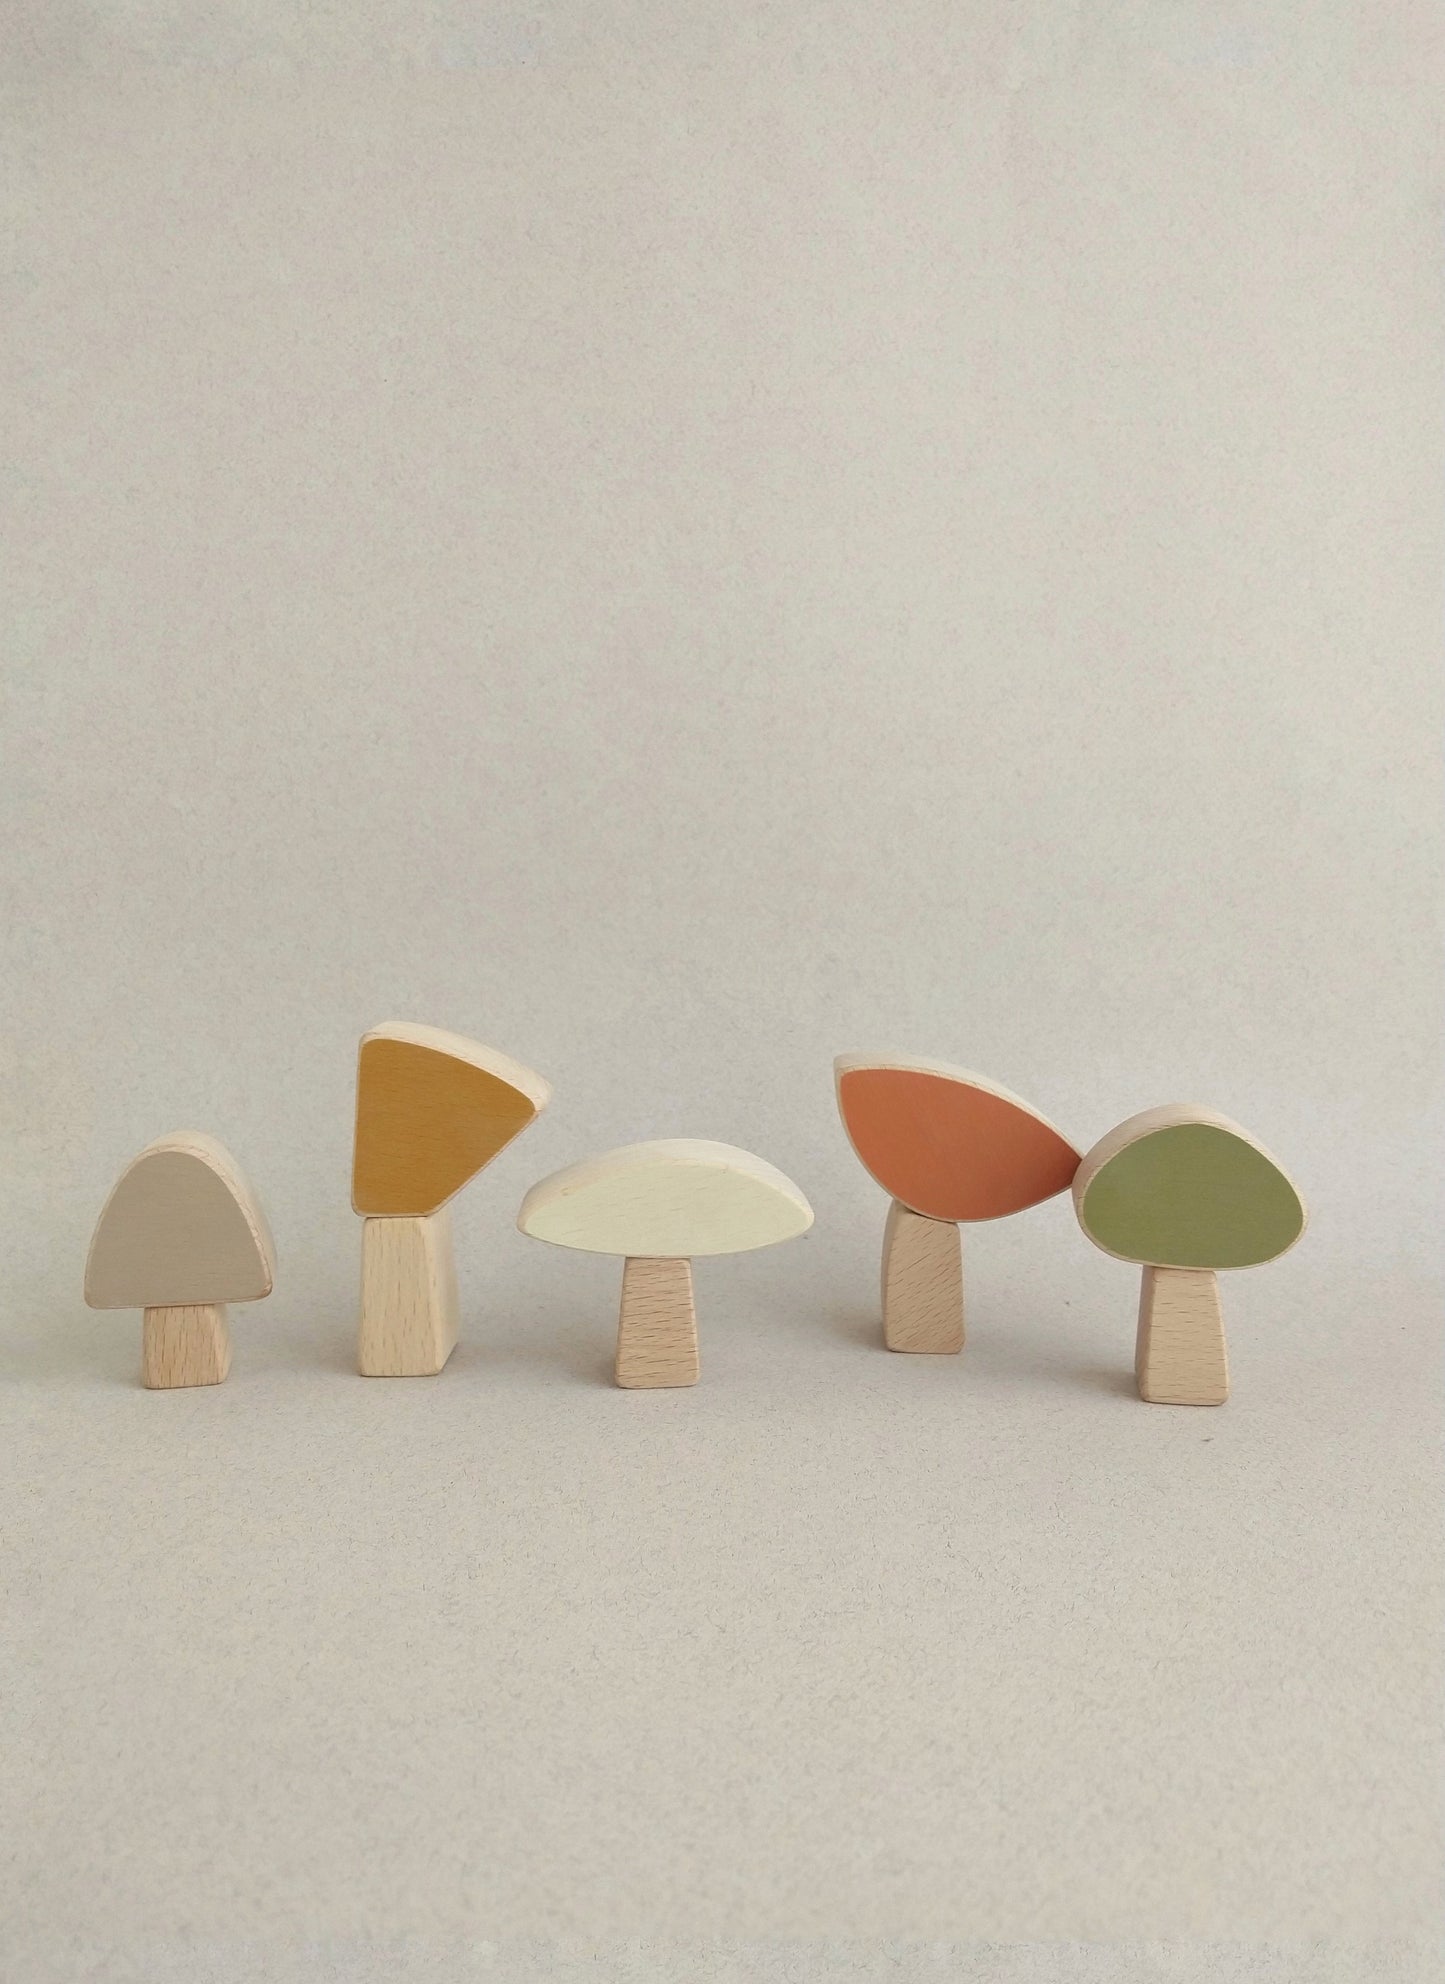 Magnetic wooden play set with mushrooms